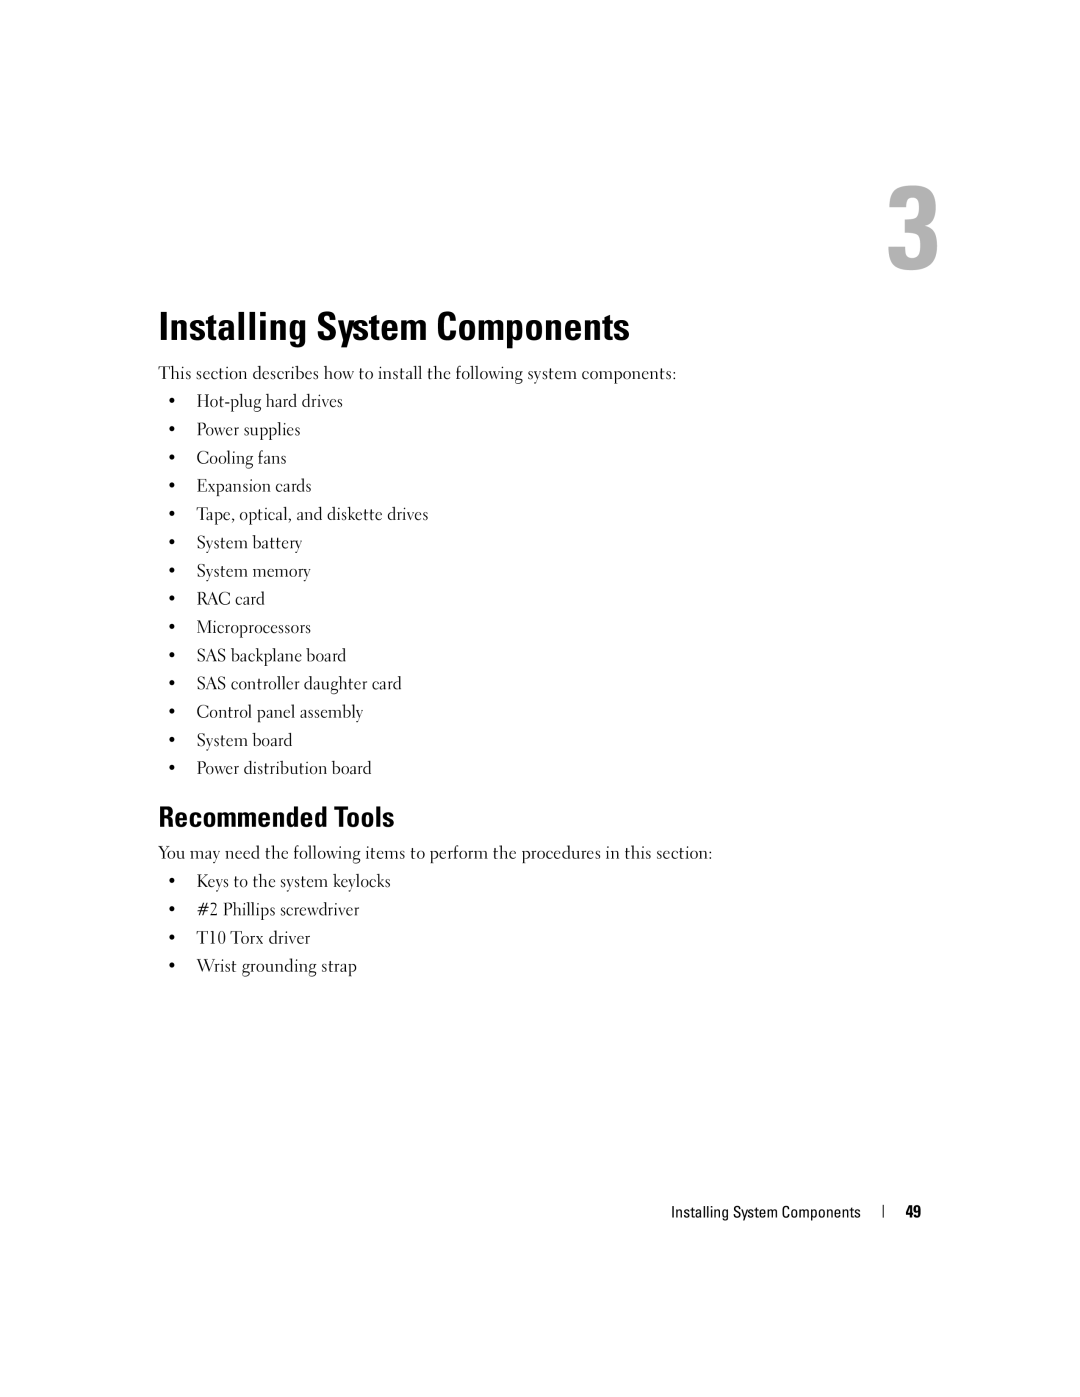 Dell 2900 owner manual Installing System Components, Recommended Tools 